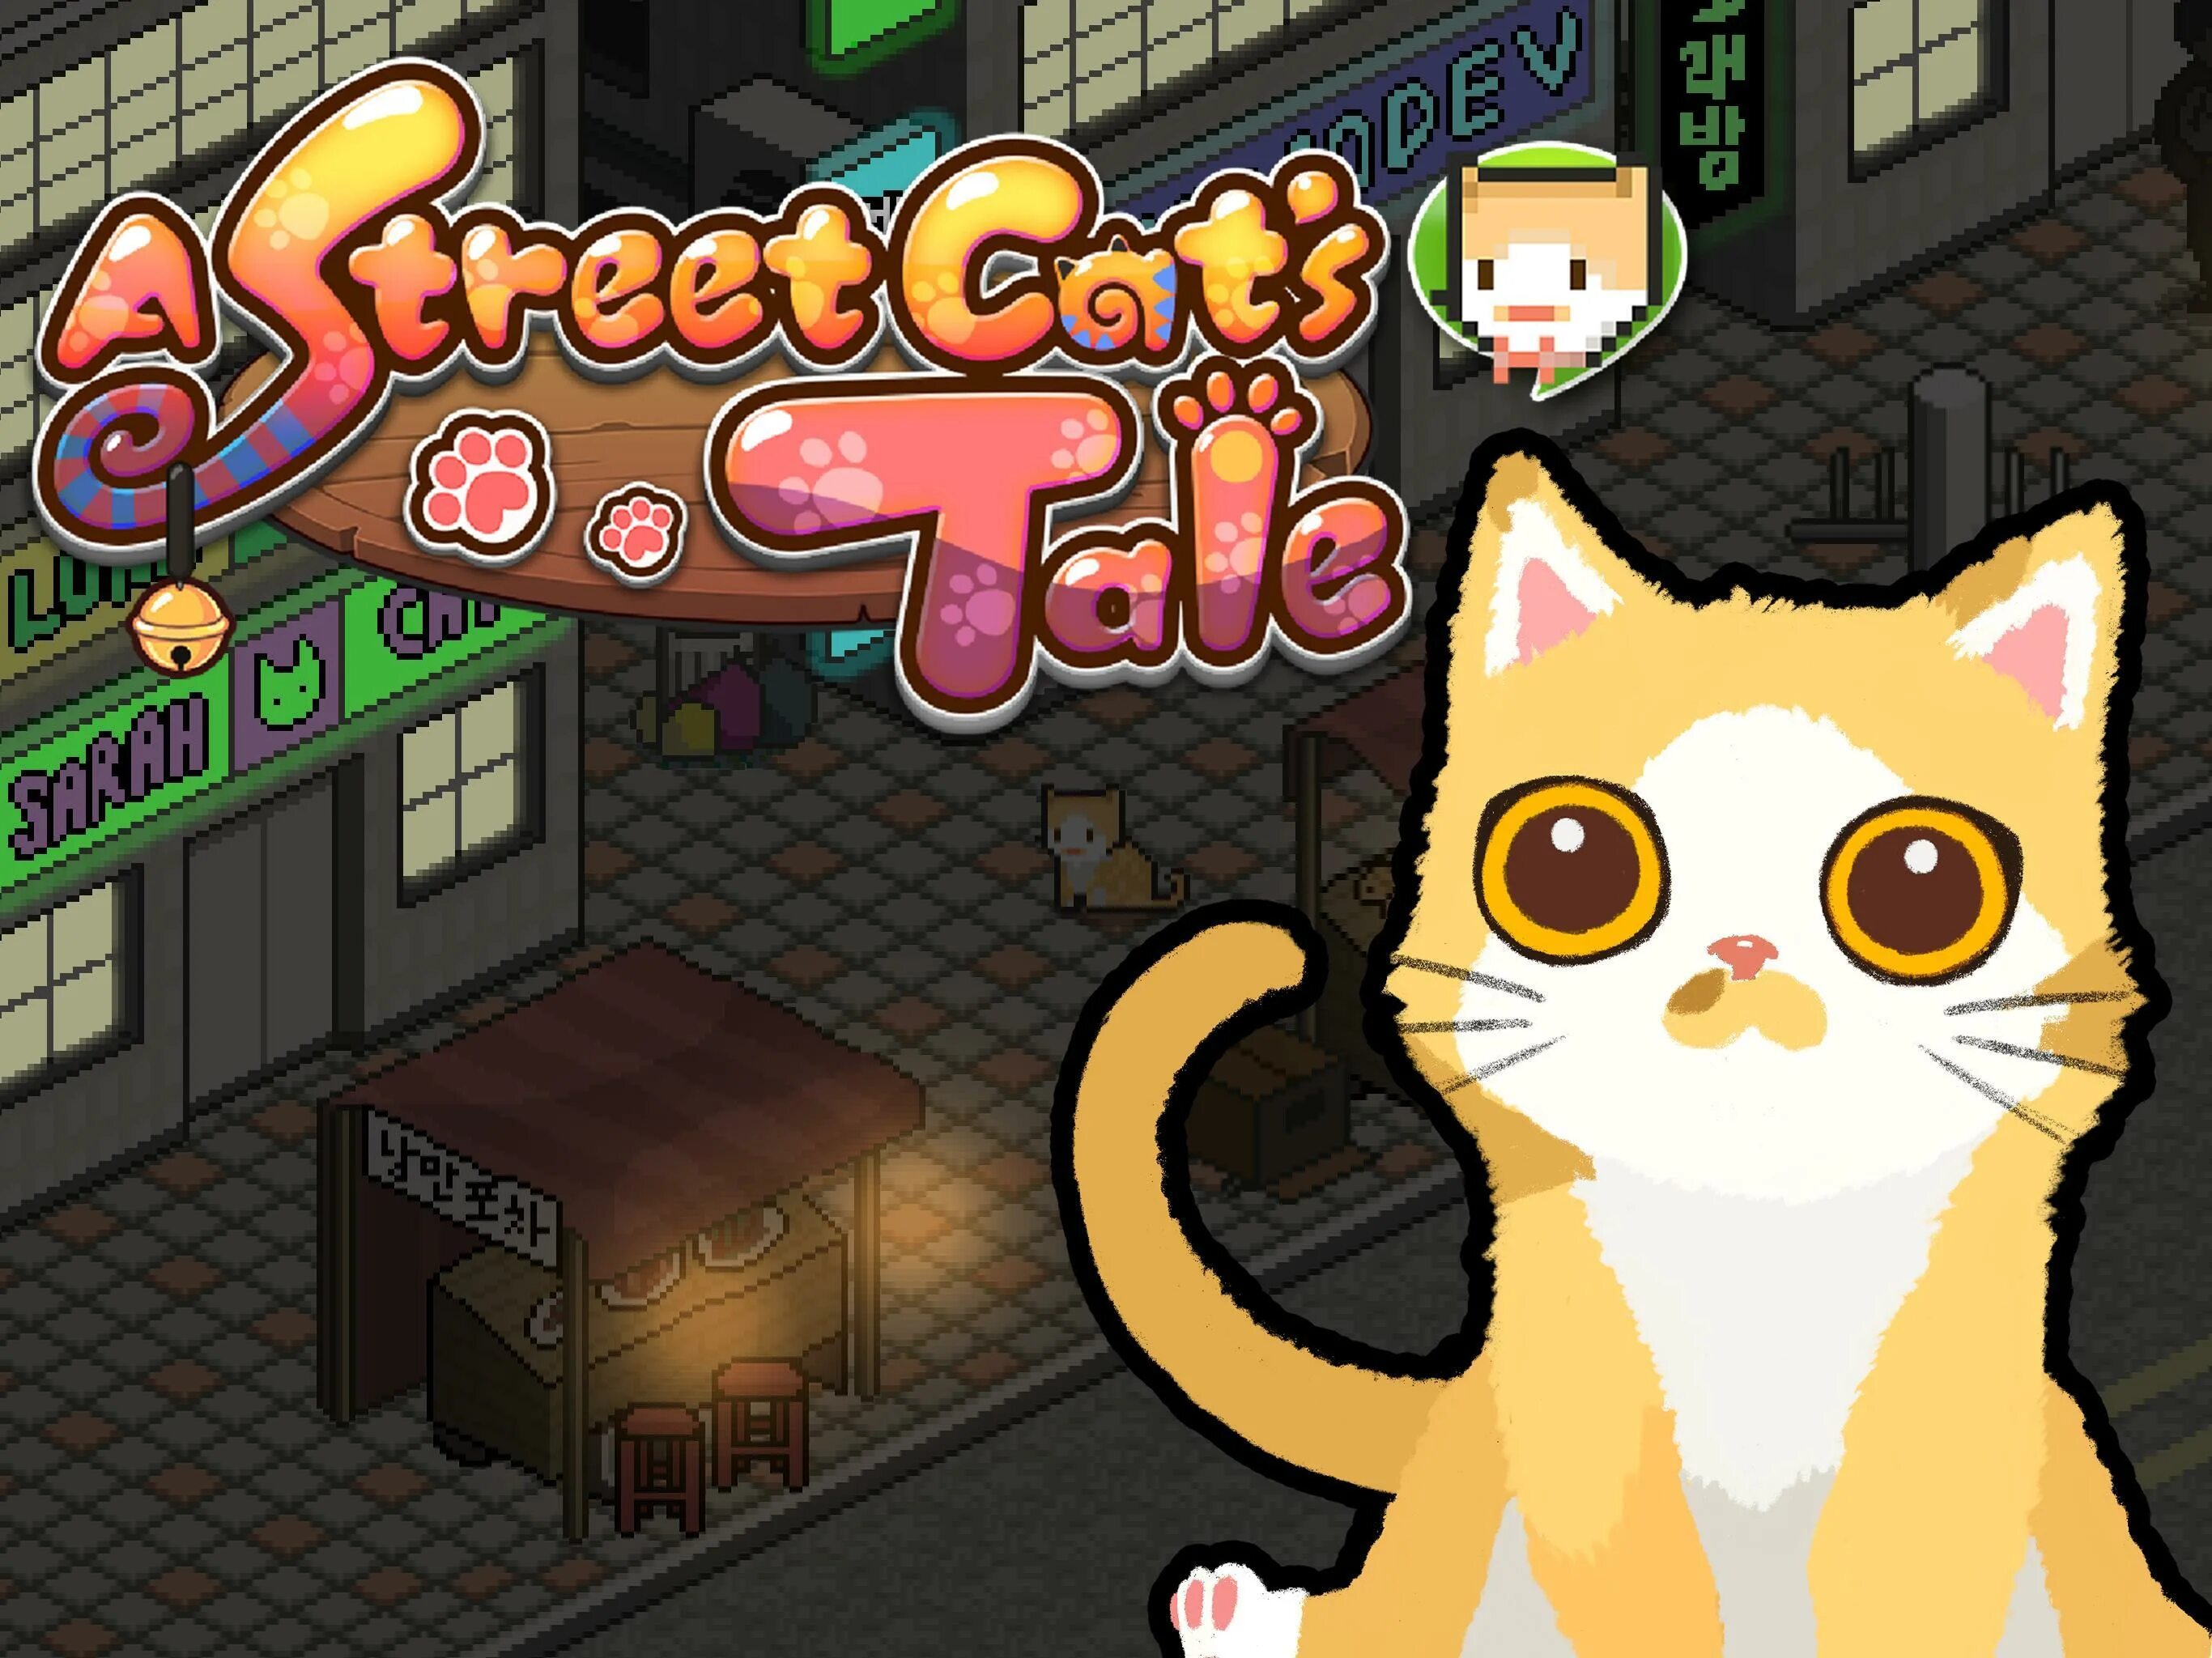 Игра a street cat s. Игра a Street Cat's Tale. Кат Кэт игра. A Street Cat's Tale концовки. A Street Cat's Tale кот босс.